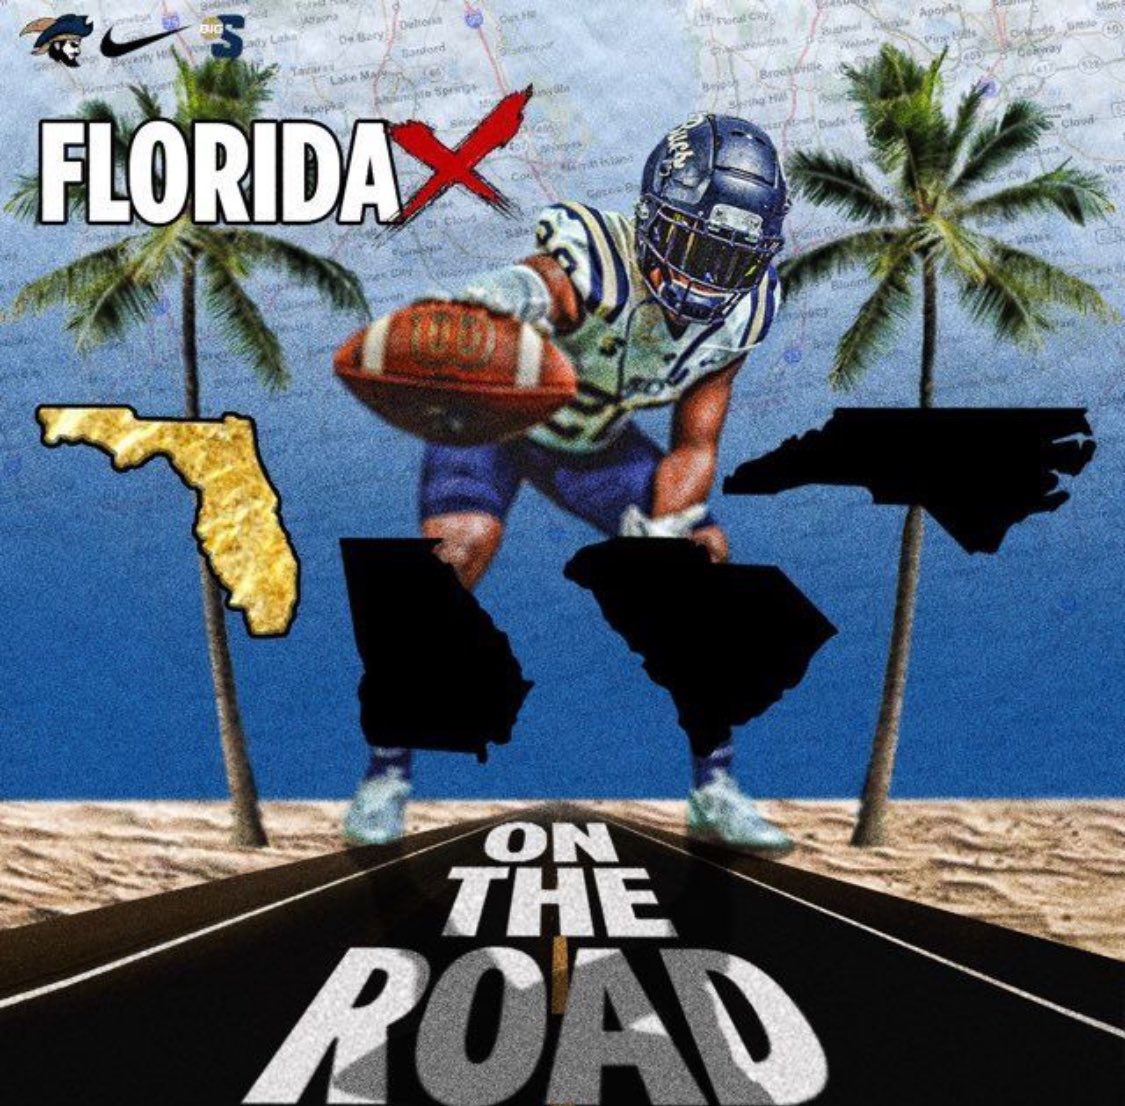 Down in the ☀️ 🍊 State finding some Dudes Prowling around